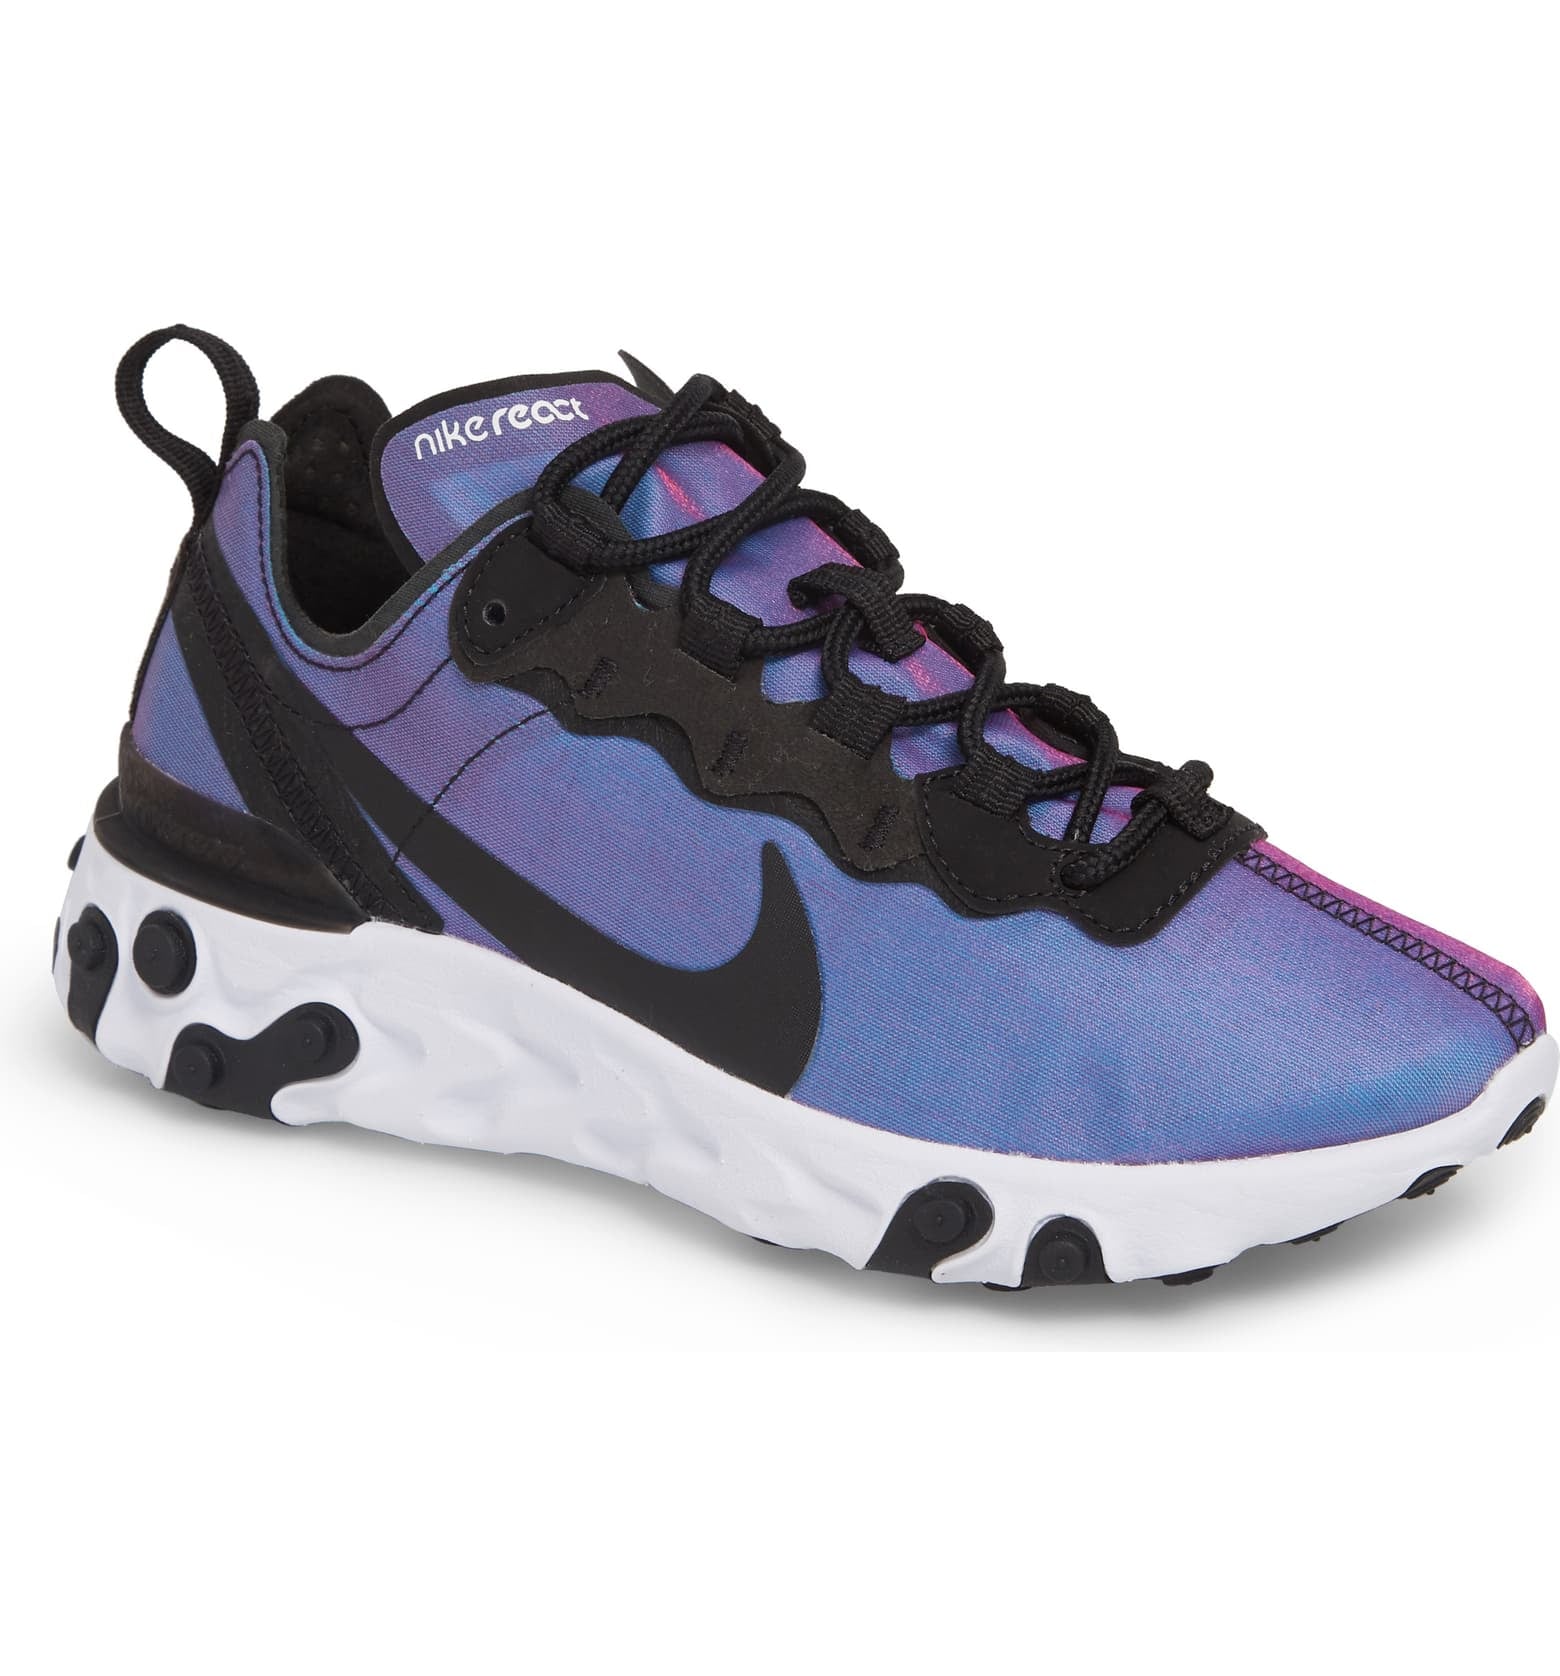 Vooruitzien Krachtcel Vulkanisch Nike React Element 55 Premium Sneakers | These 9 Nike Sneakers Are All on  Sale at Nordstrom, So Send Help to Our Wallets | POPSUGAR Fitness Photo 5